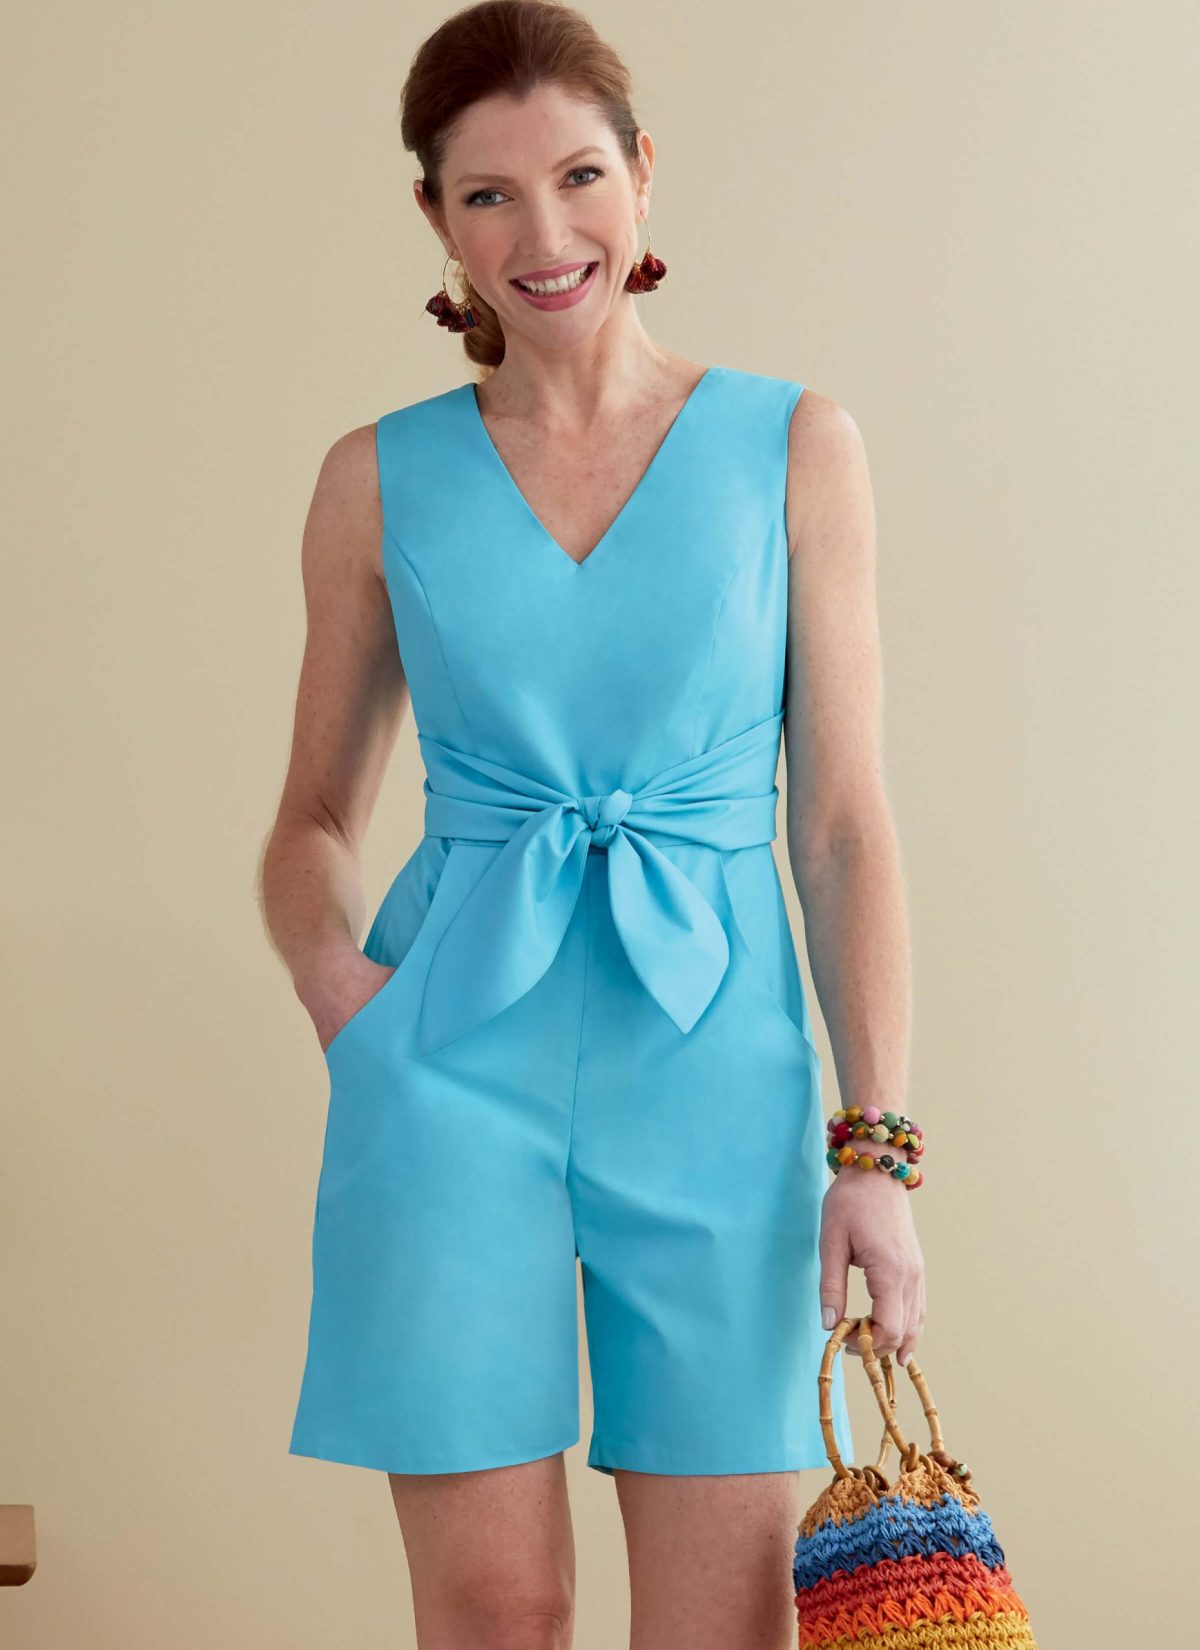 Butterick Sewing Pattern B6760 Misses' Dress and Playsuit. Lisette.